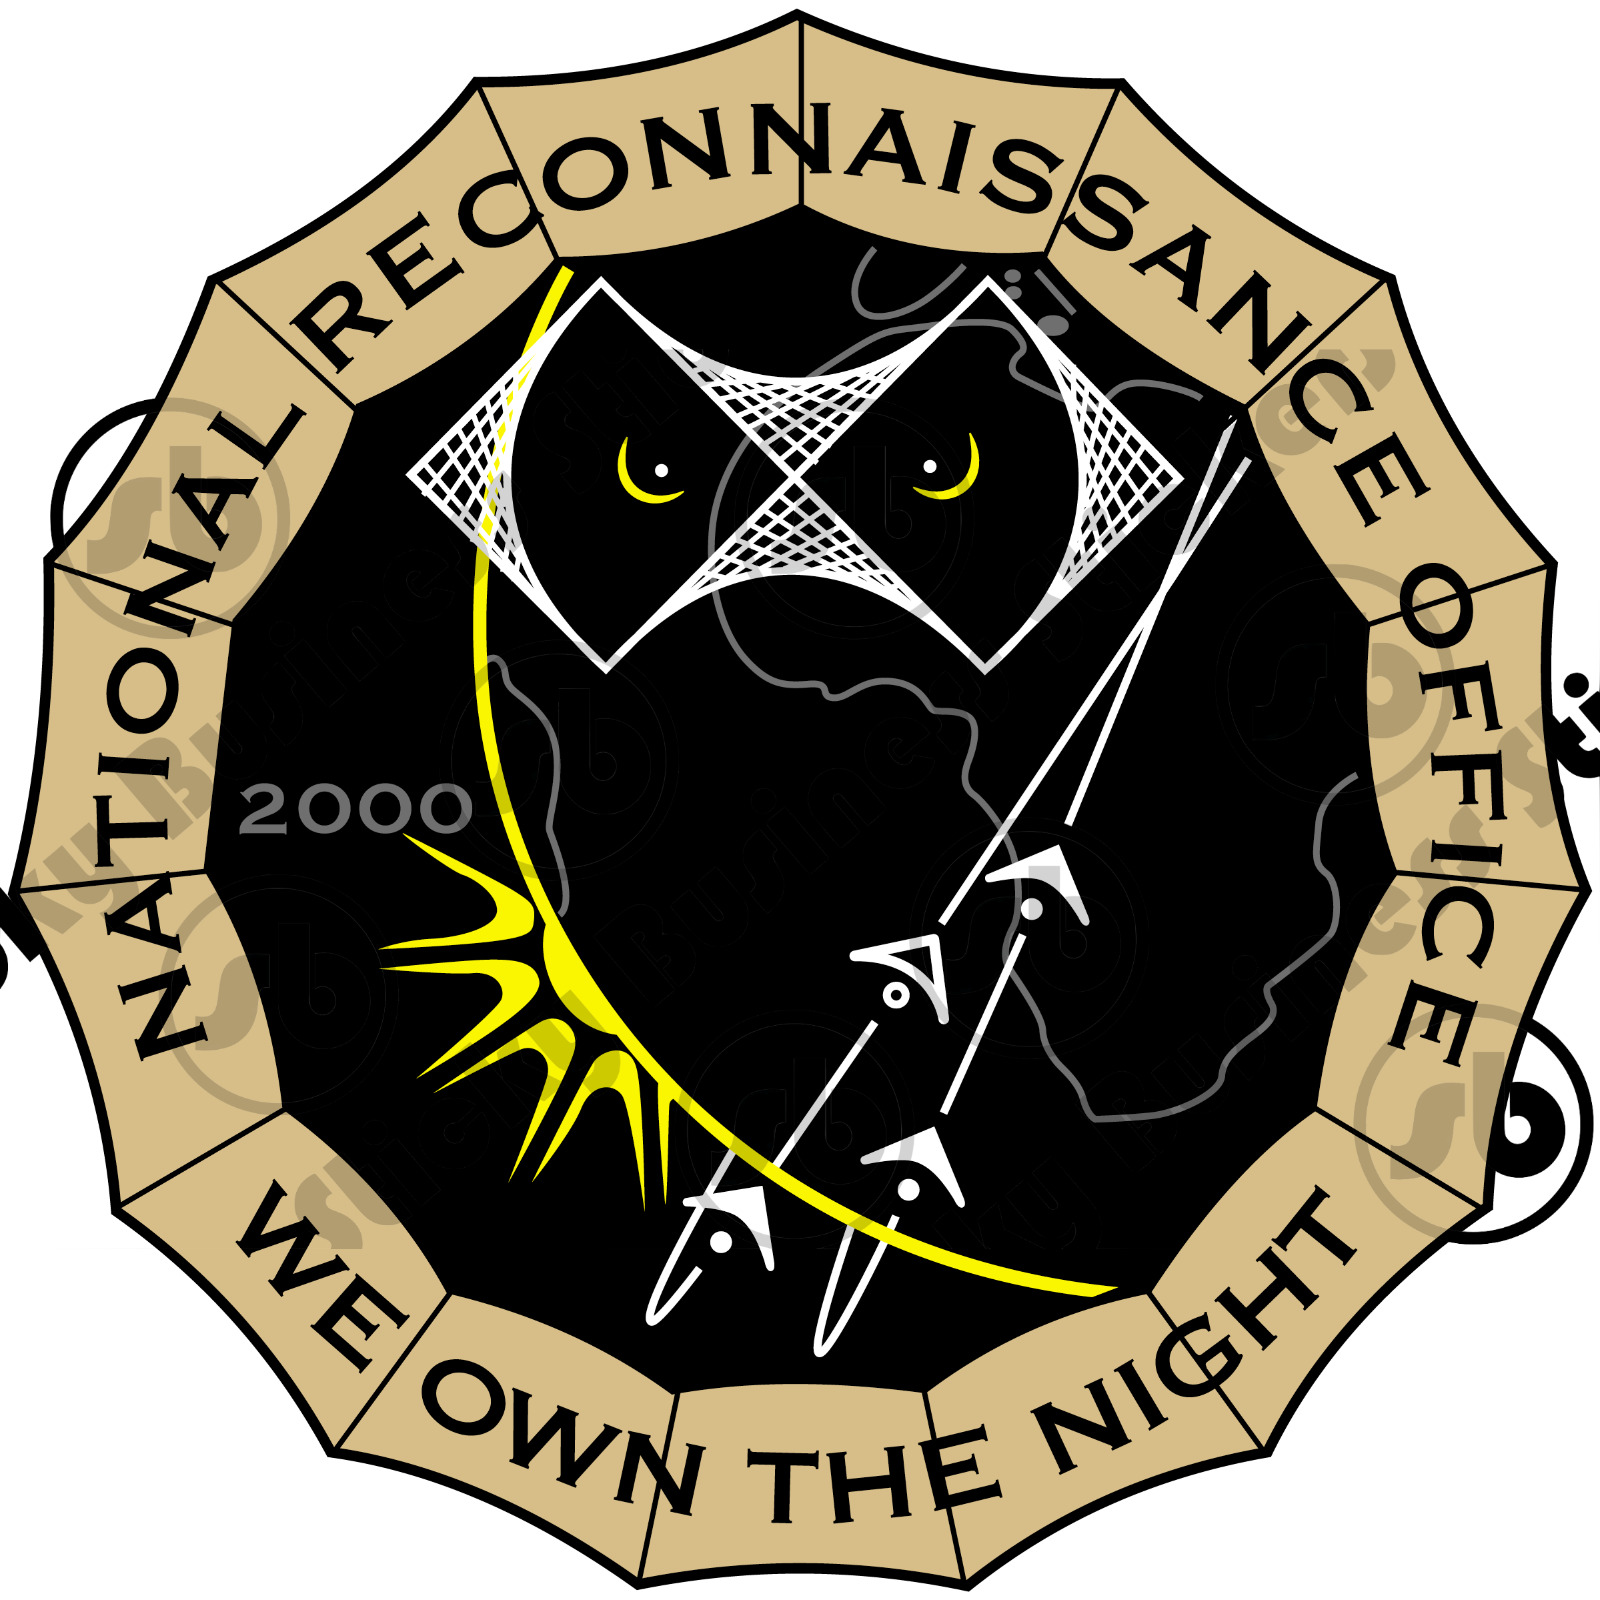 Top Secret NRO Patch Magnet We Own The Night Spy Skunk Works CIA NSA